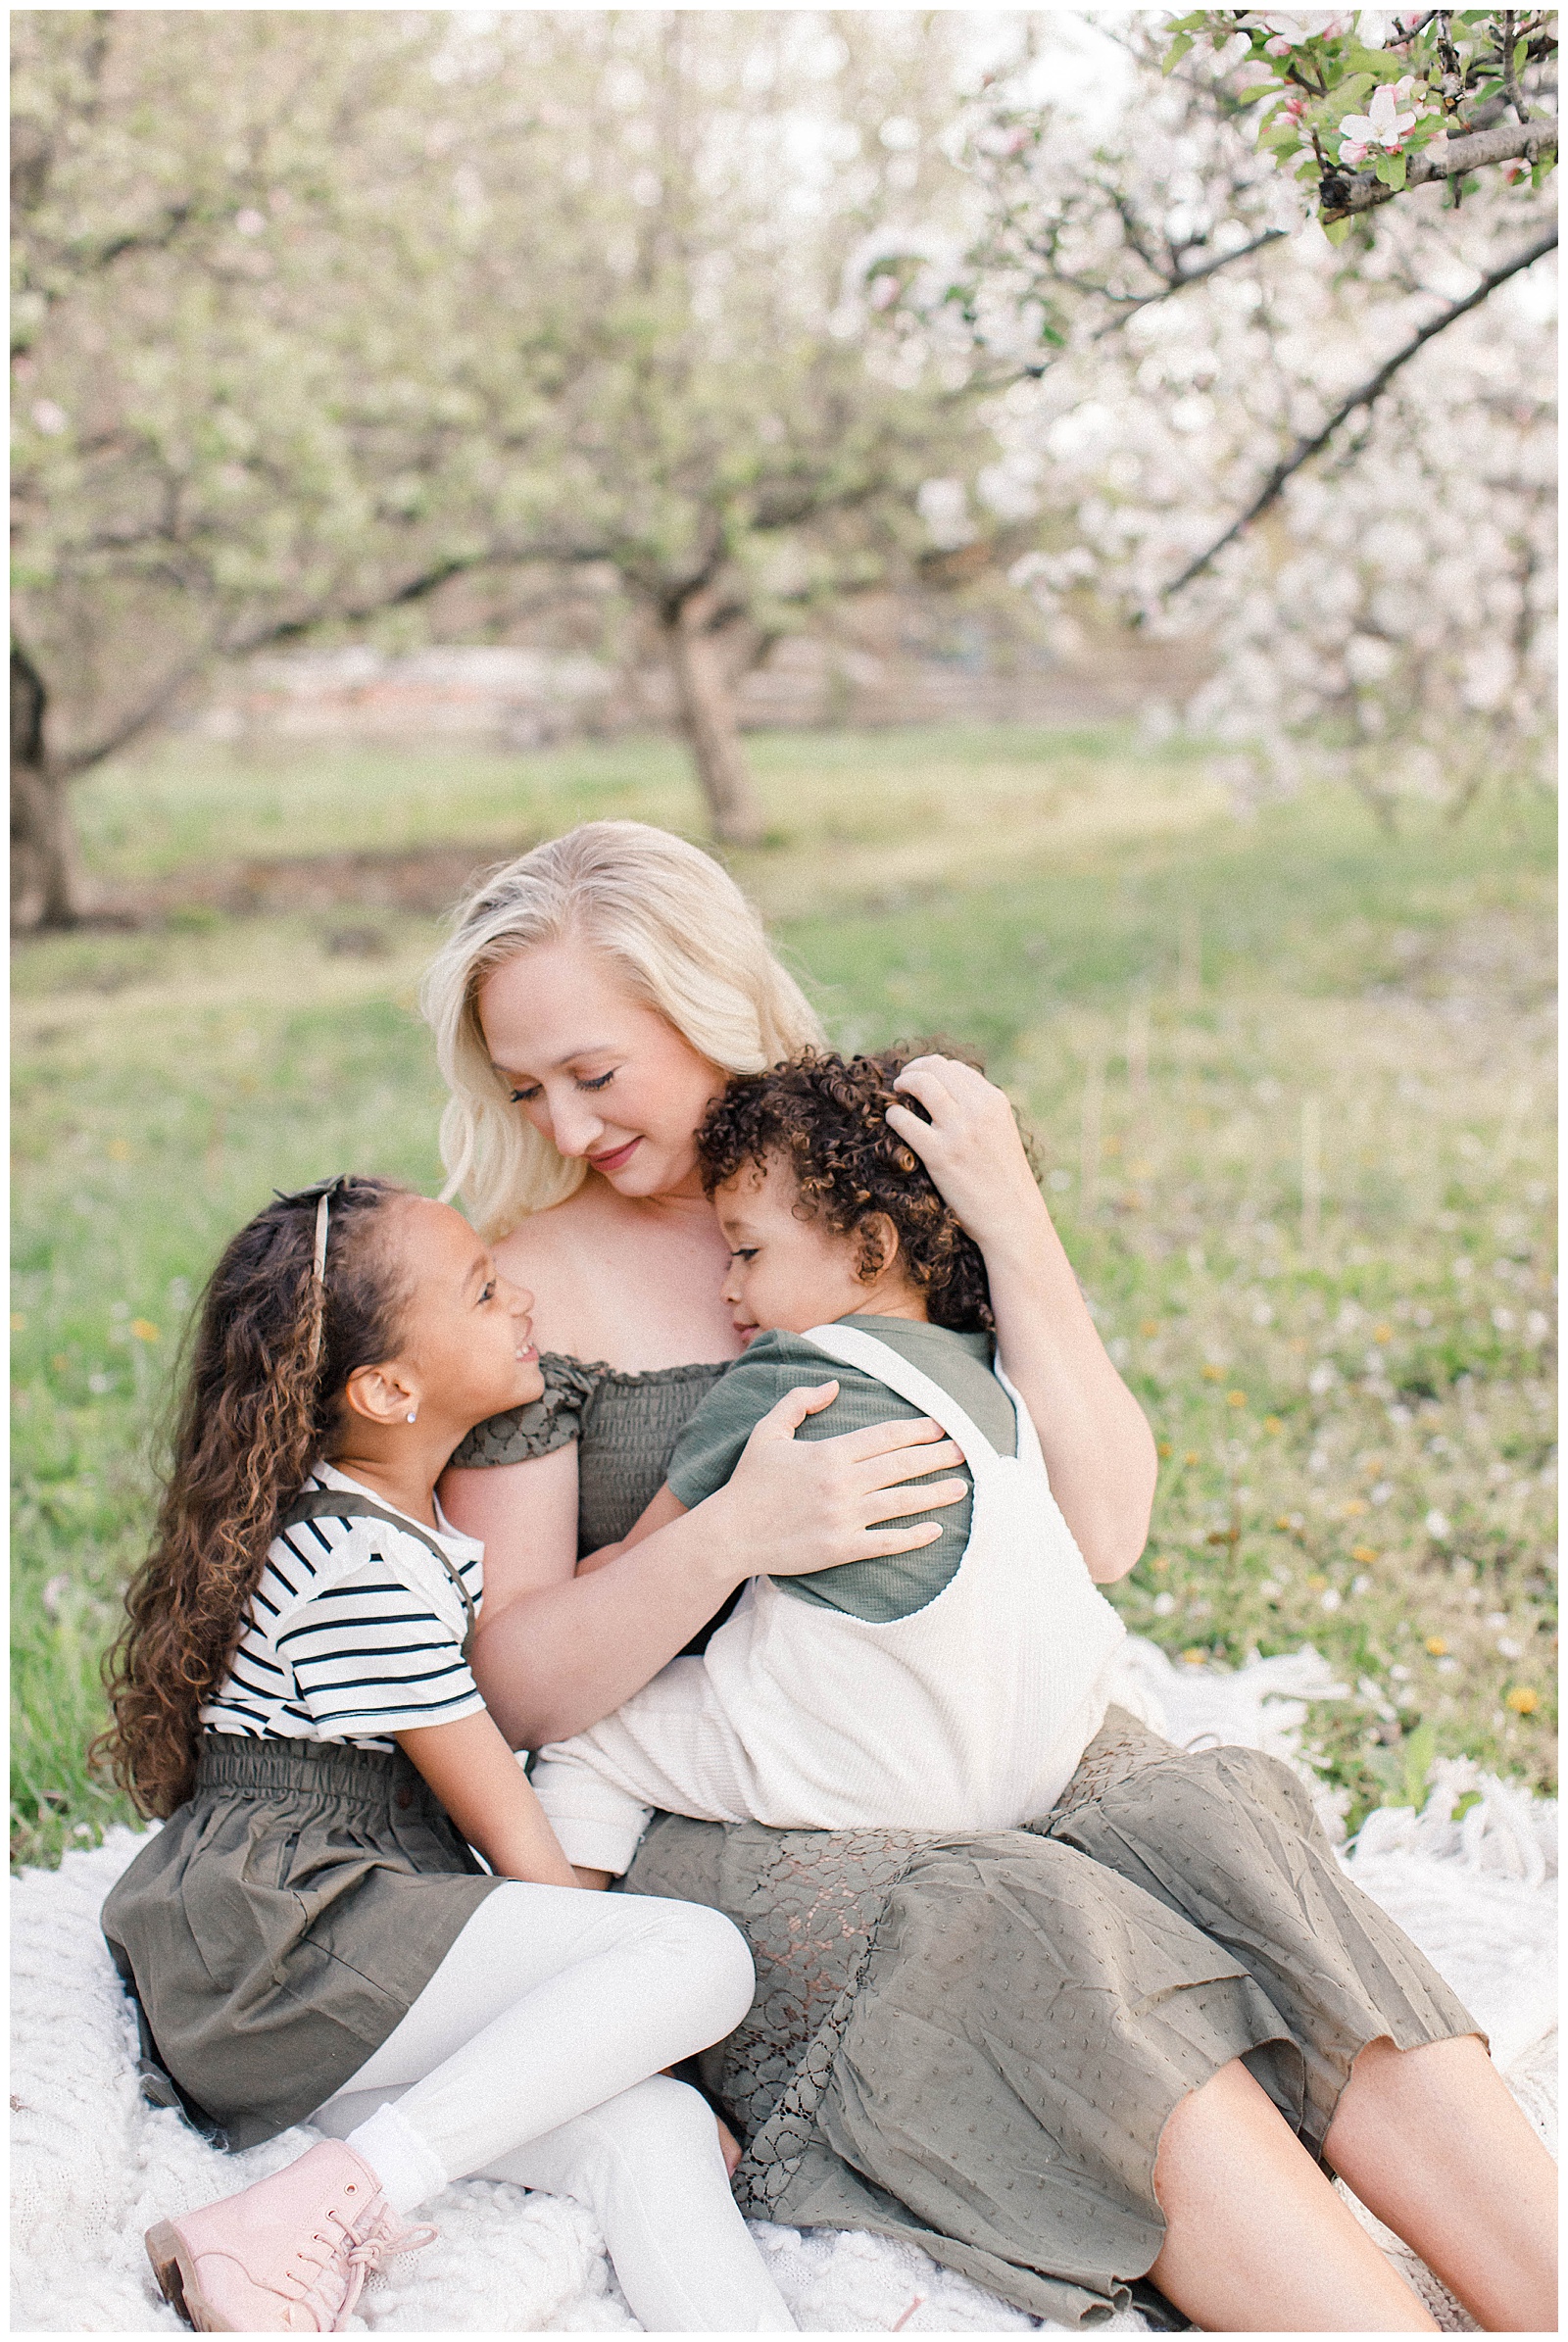 Apple blossom family session at Cider Hill Family Orchard